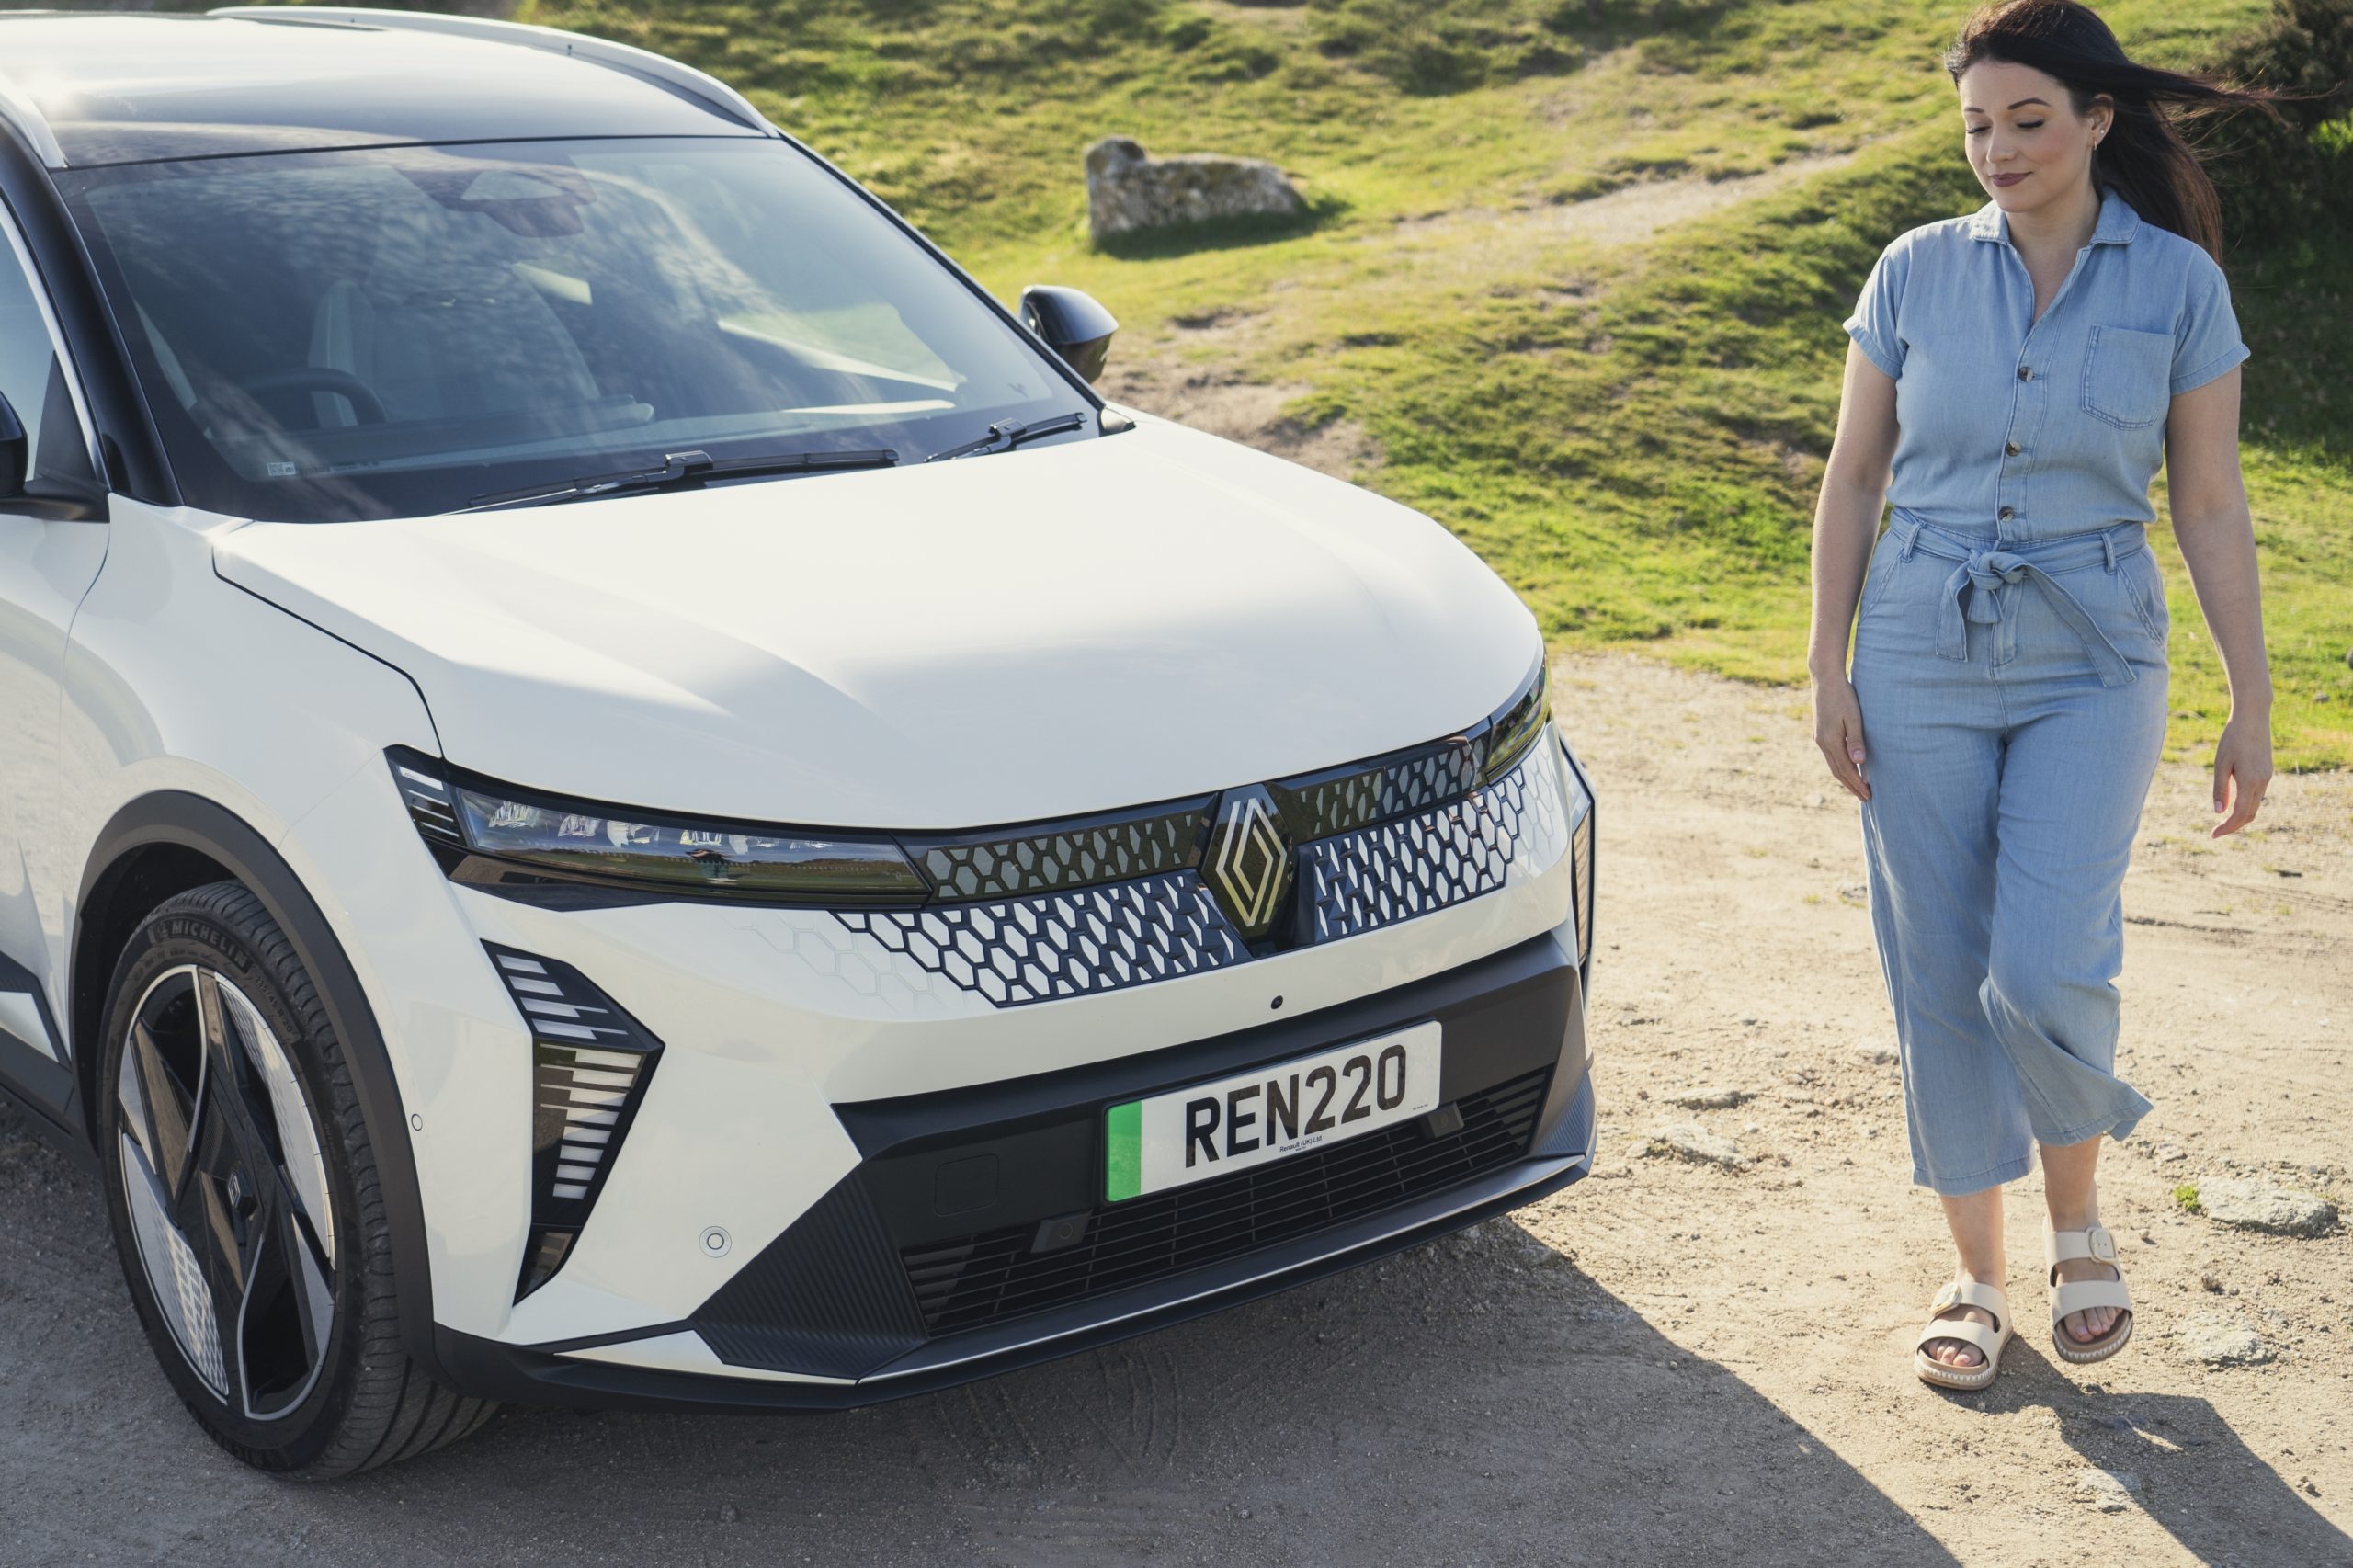 Renault and She’s Electric partner to inform and empower women to make the switch to driving electric